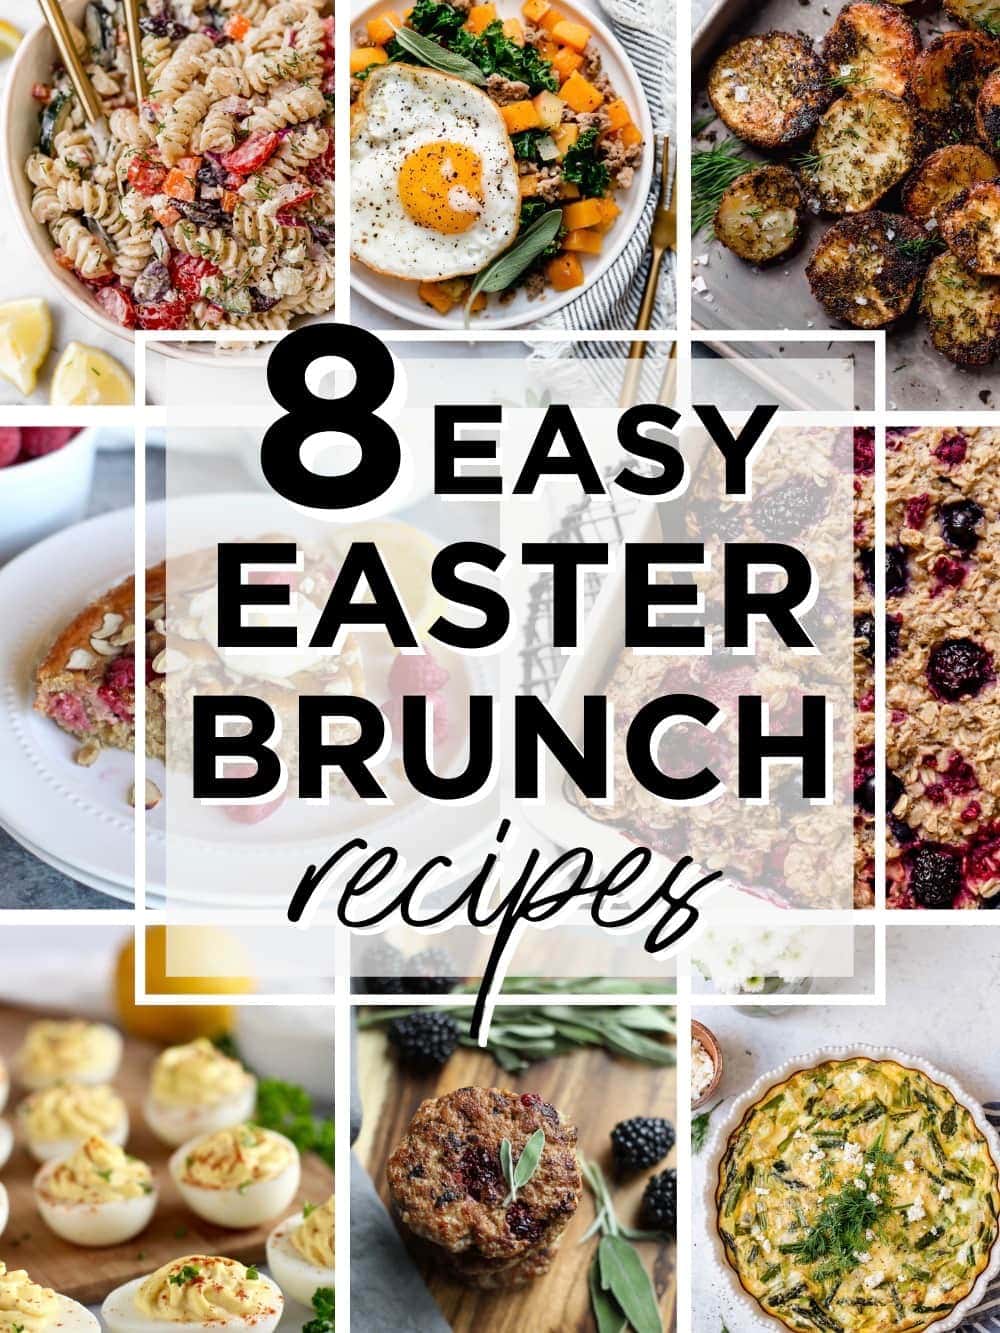 8 Healthy Easter Brunch Recipes - The Real Food Dietitians